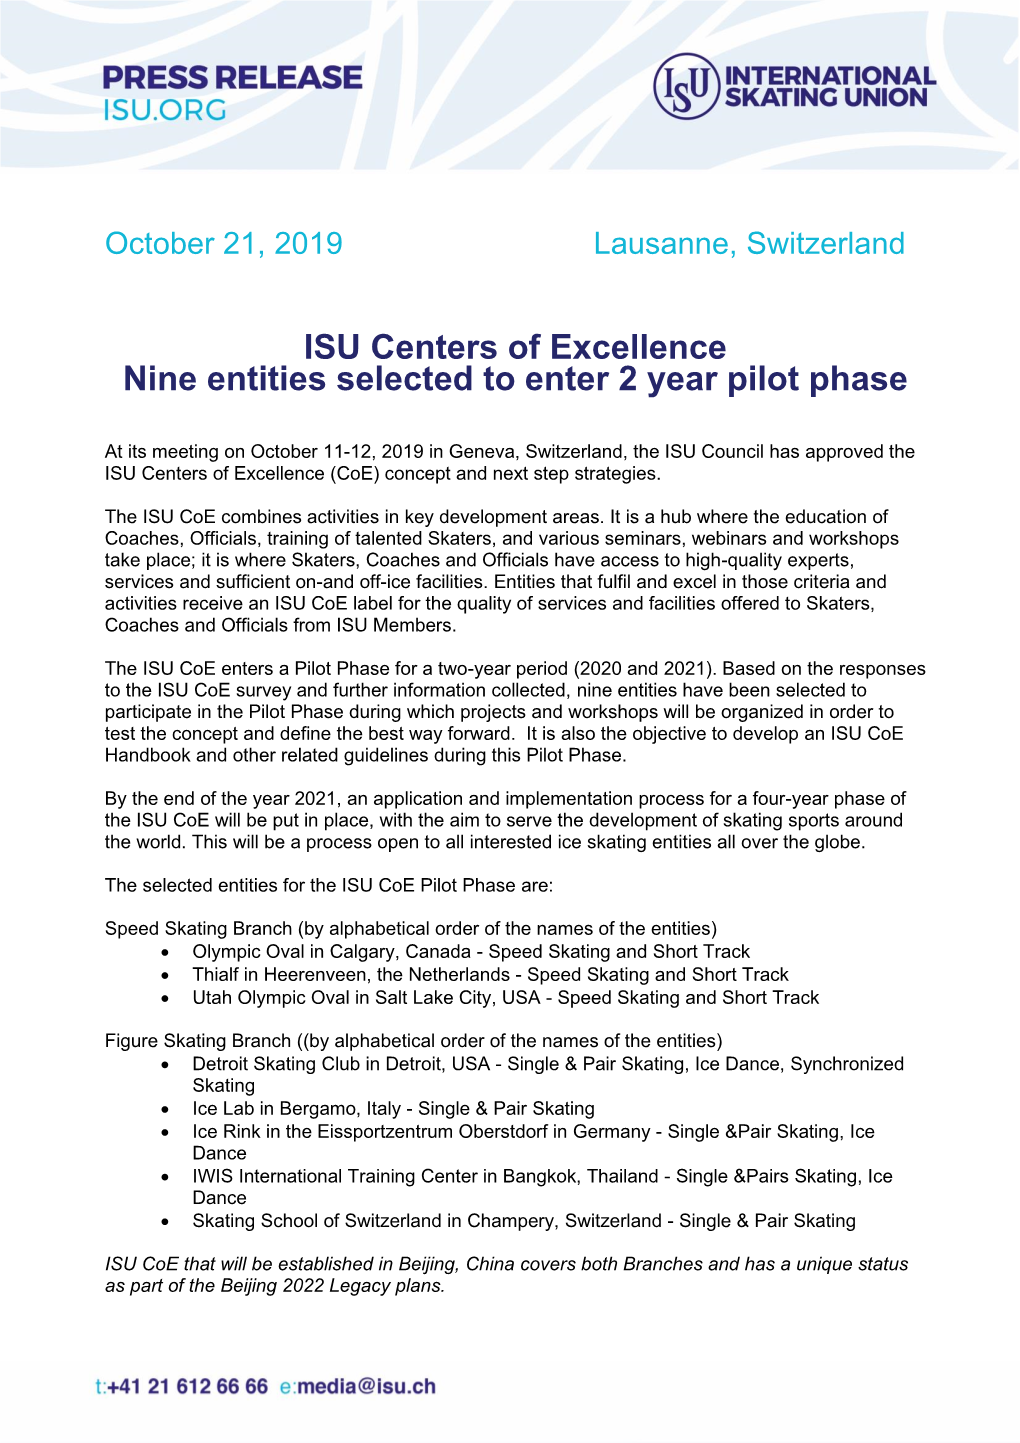 ISU Centers of Excellence Nine Entities Selected to Enter 2 Year Pilot Phase